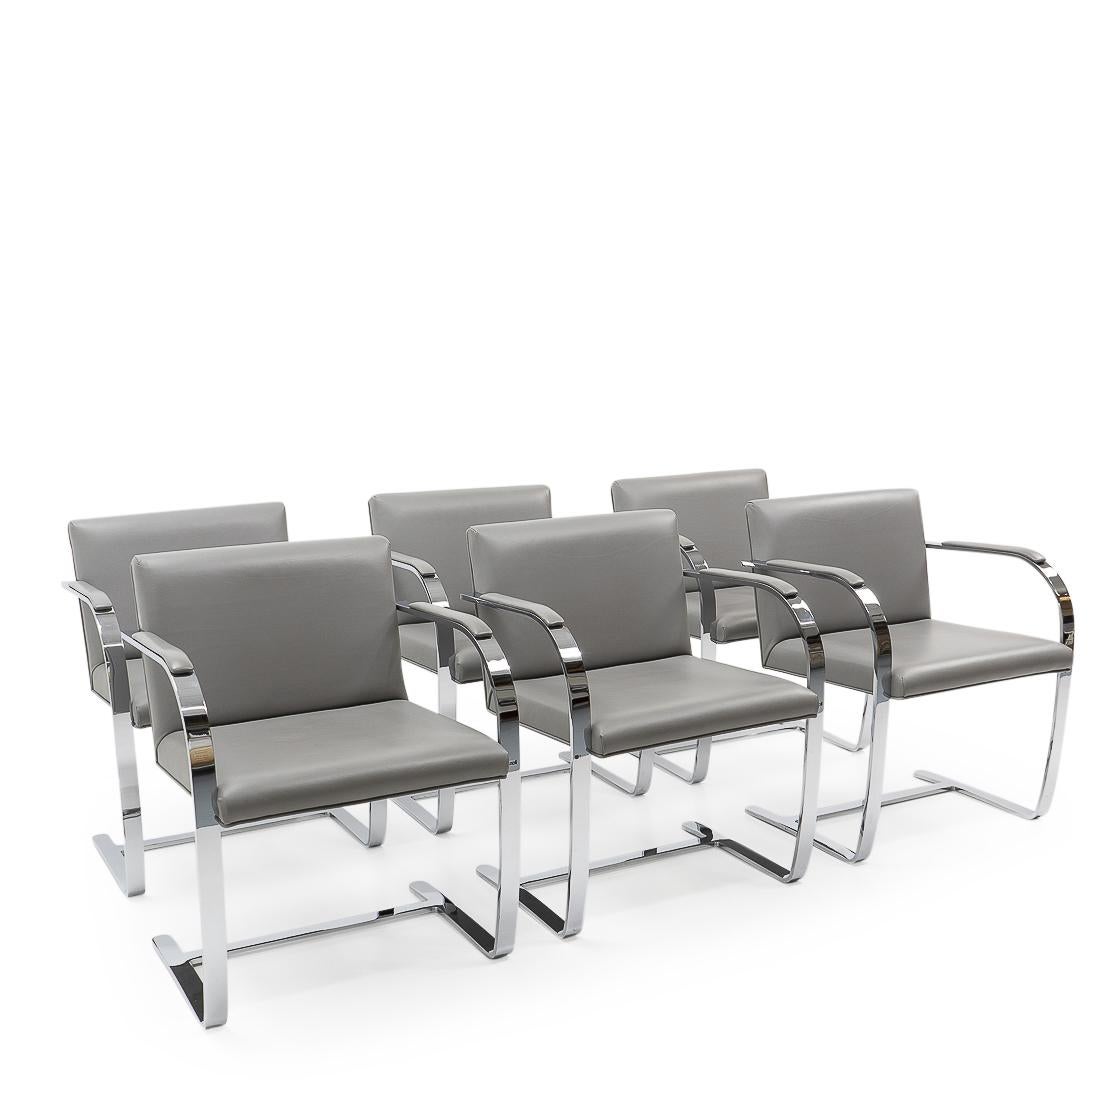 Mid-Century Modern Design Classic: Mies Van Der Rohe, Set of Six Brno Chairs for Knoll, 1980s